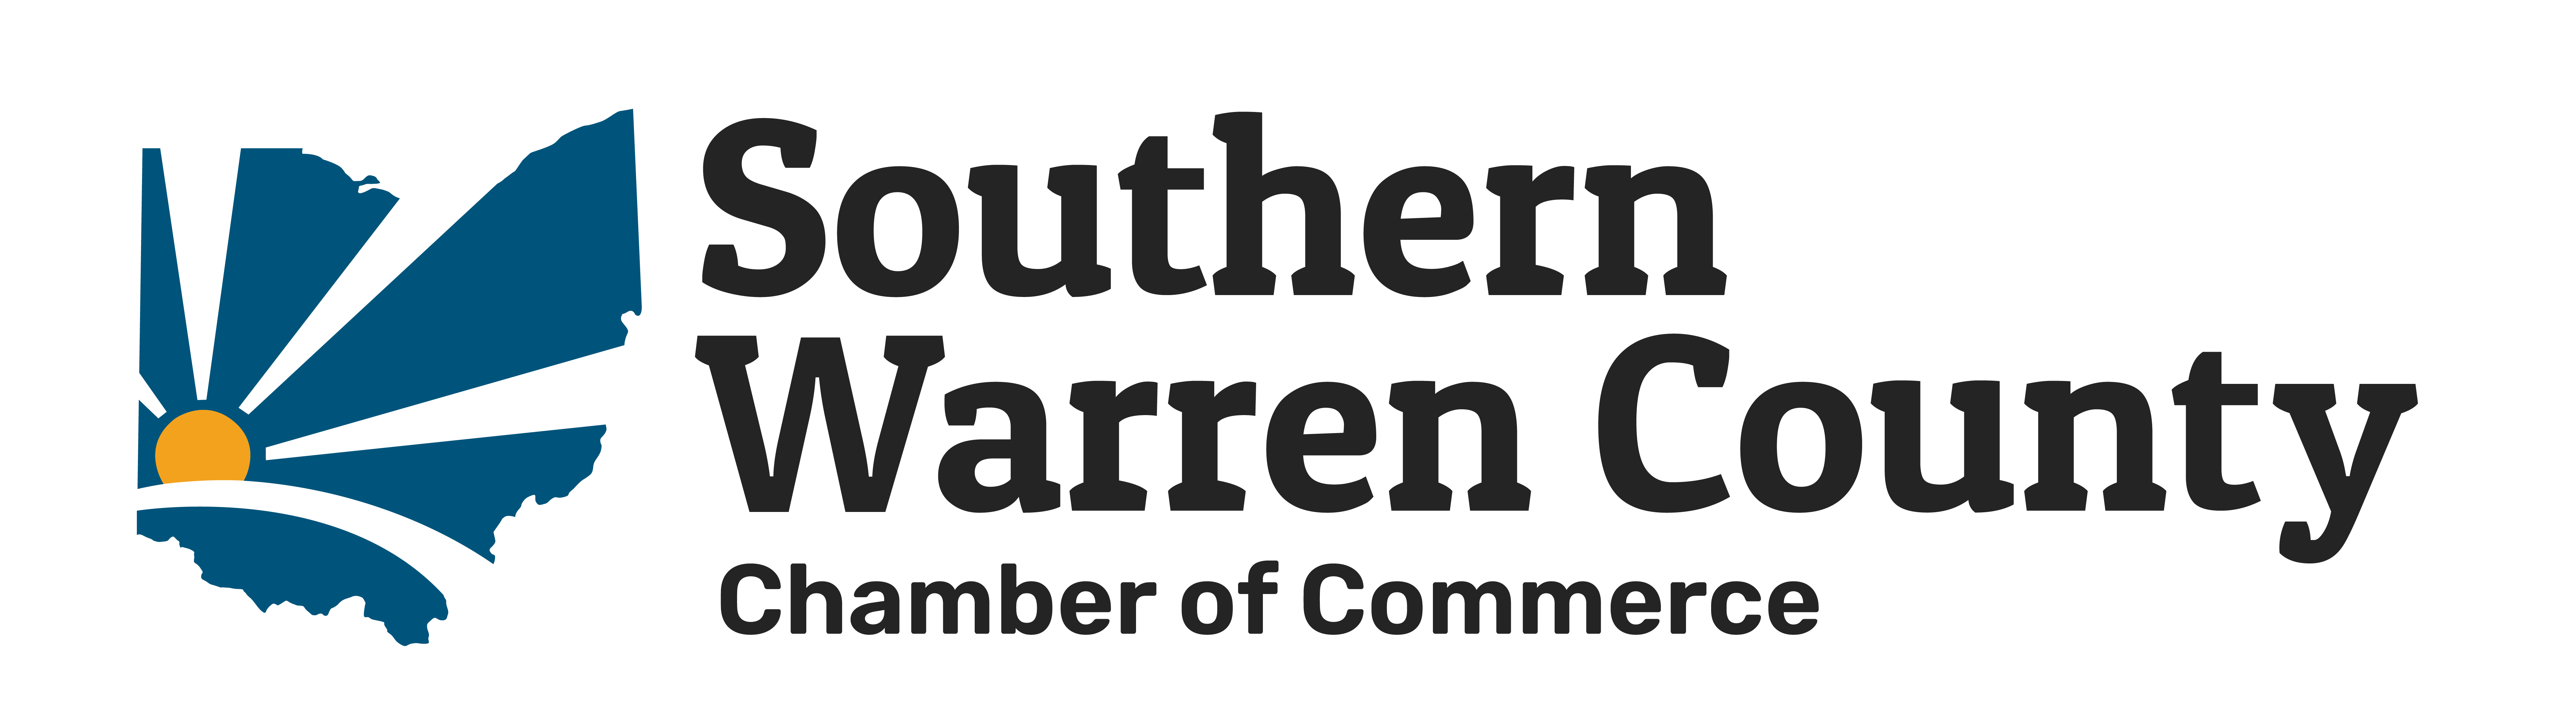 Southern Warren County Chamber of Commerce - Website Logo